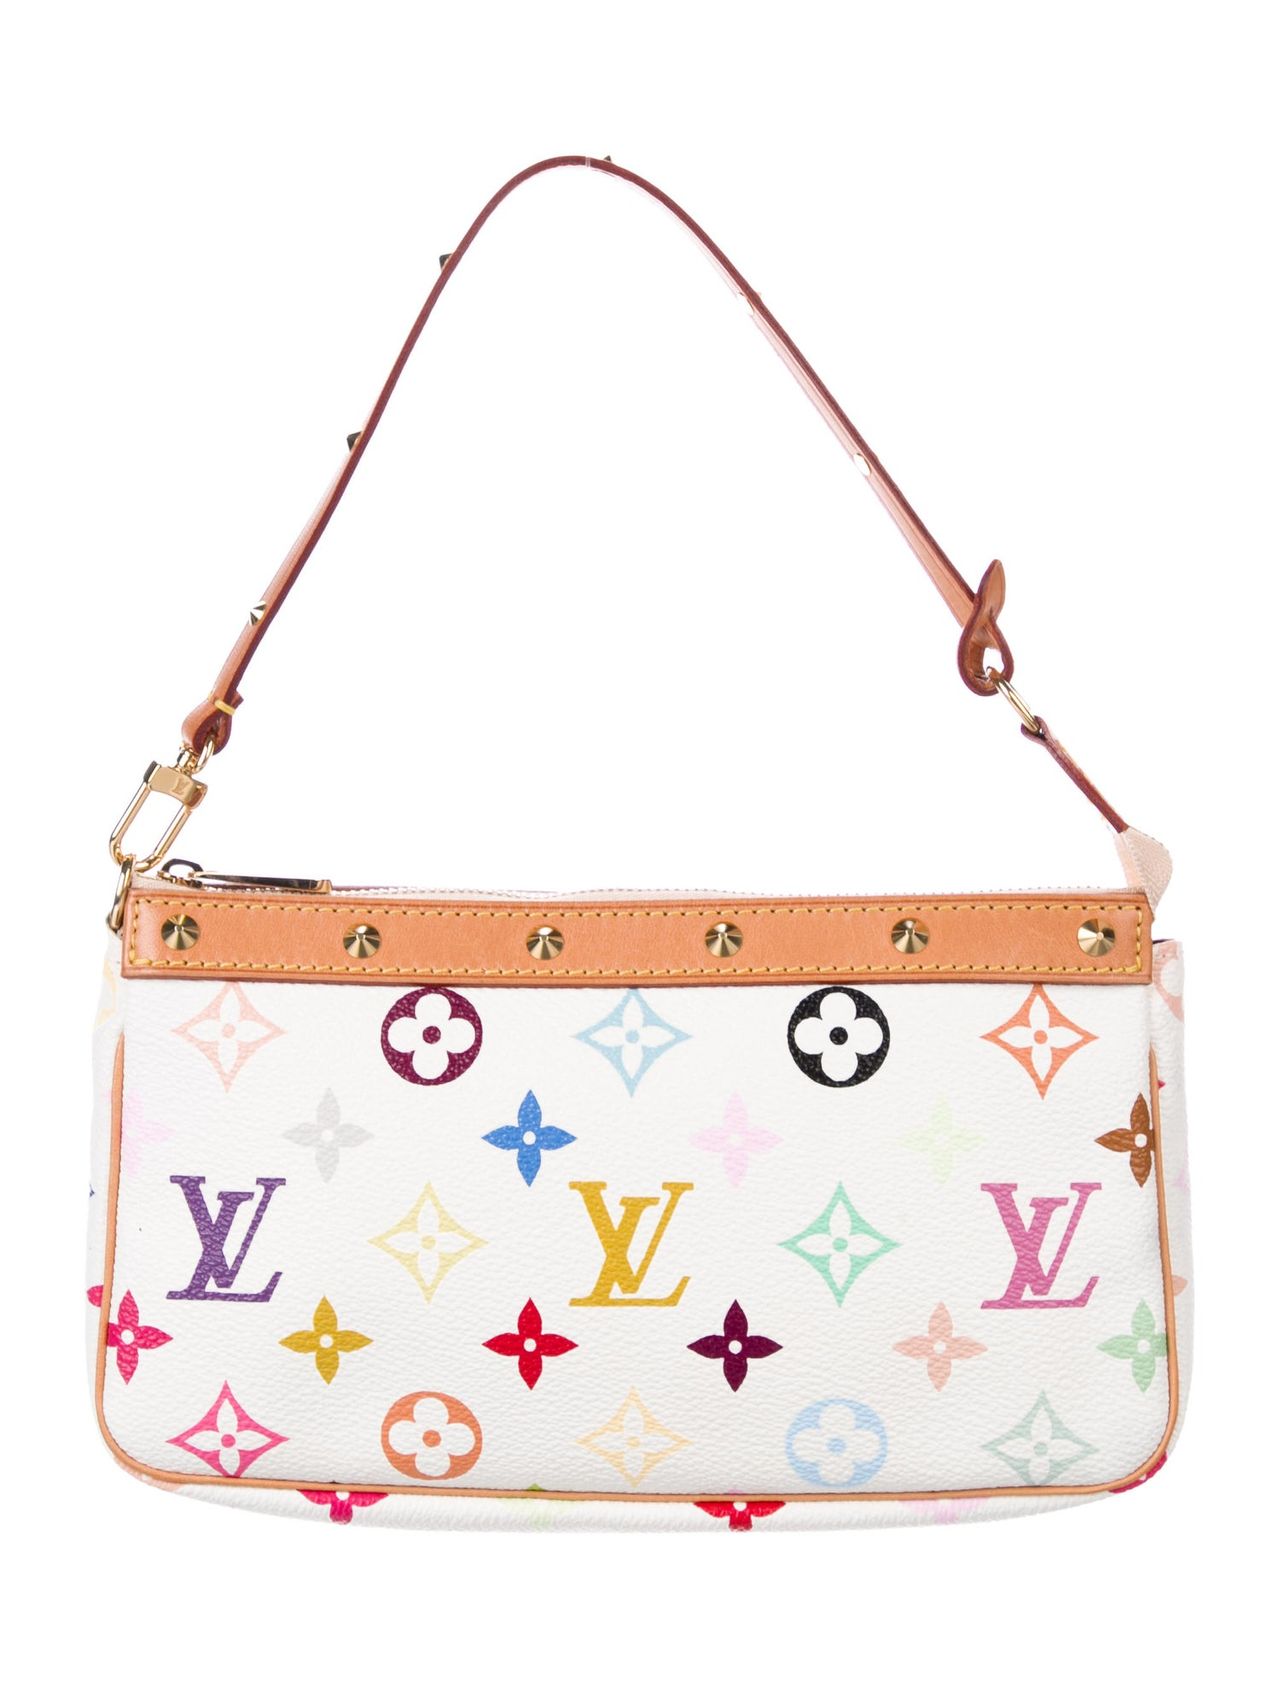 20 Under-$1000 Louis Vuitton Bags to Buy Now | Who What Wear